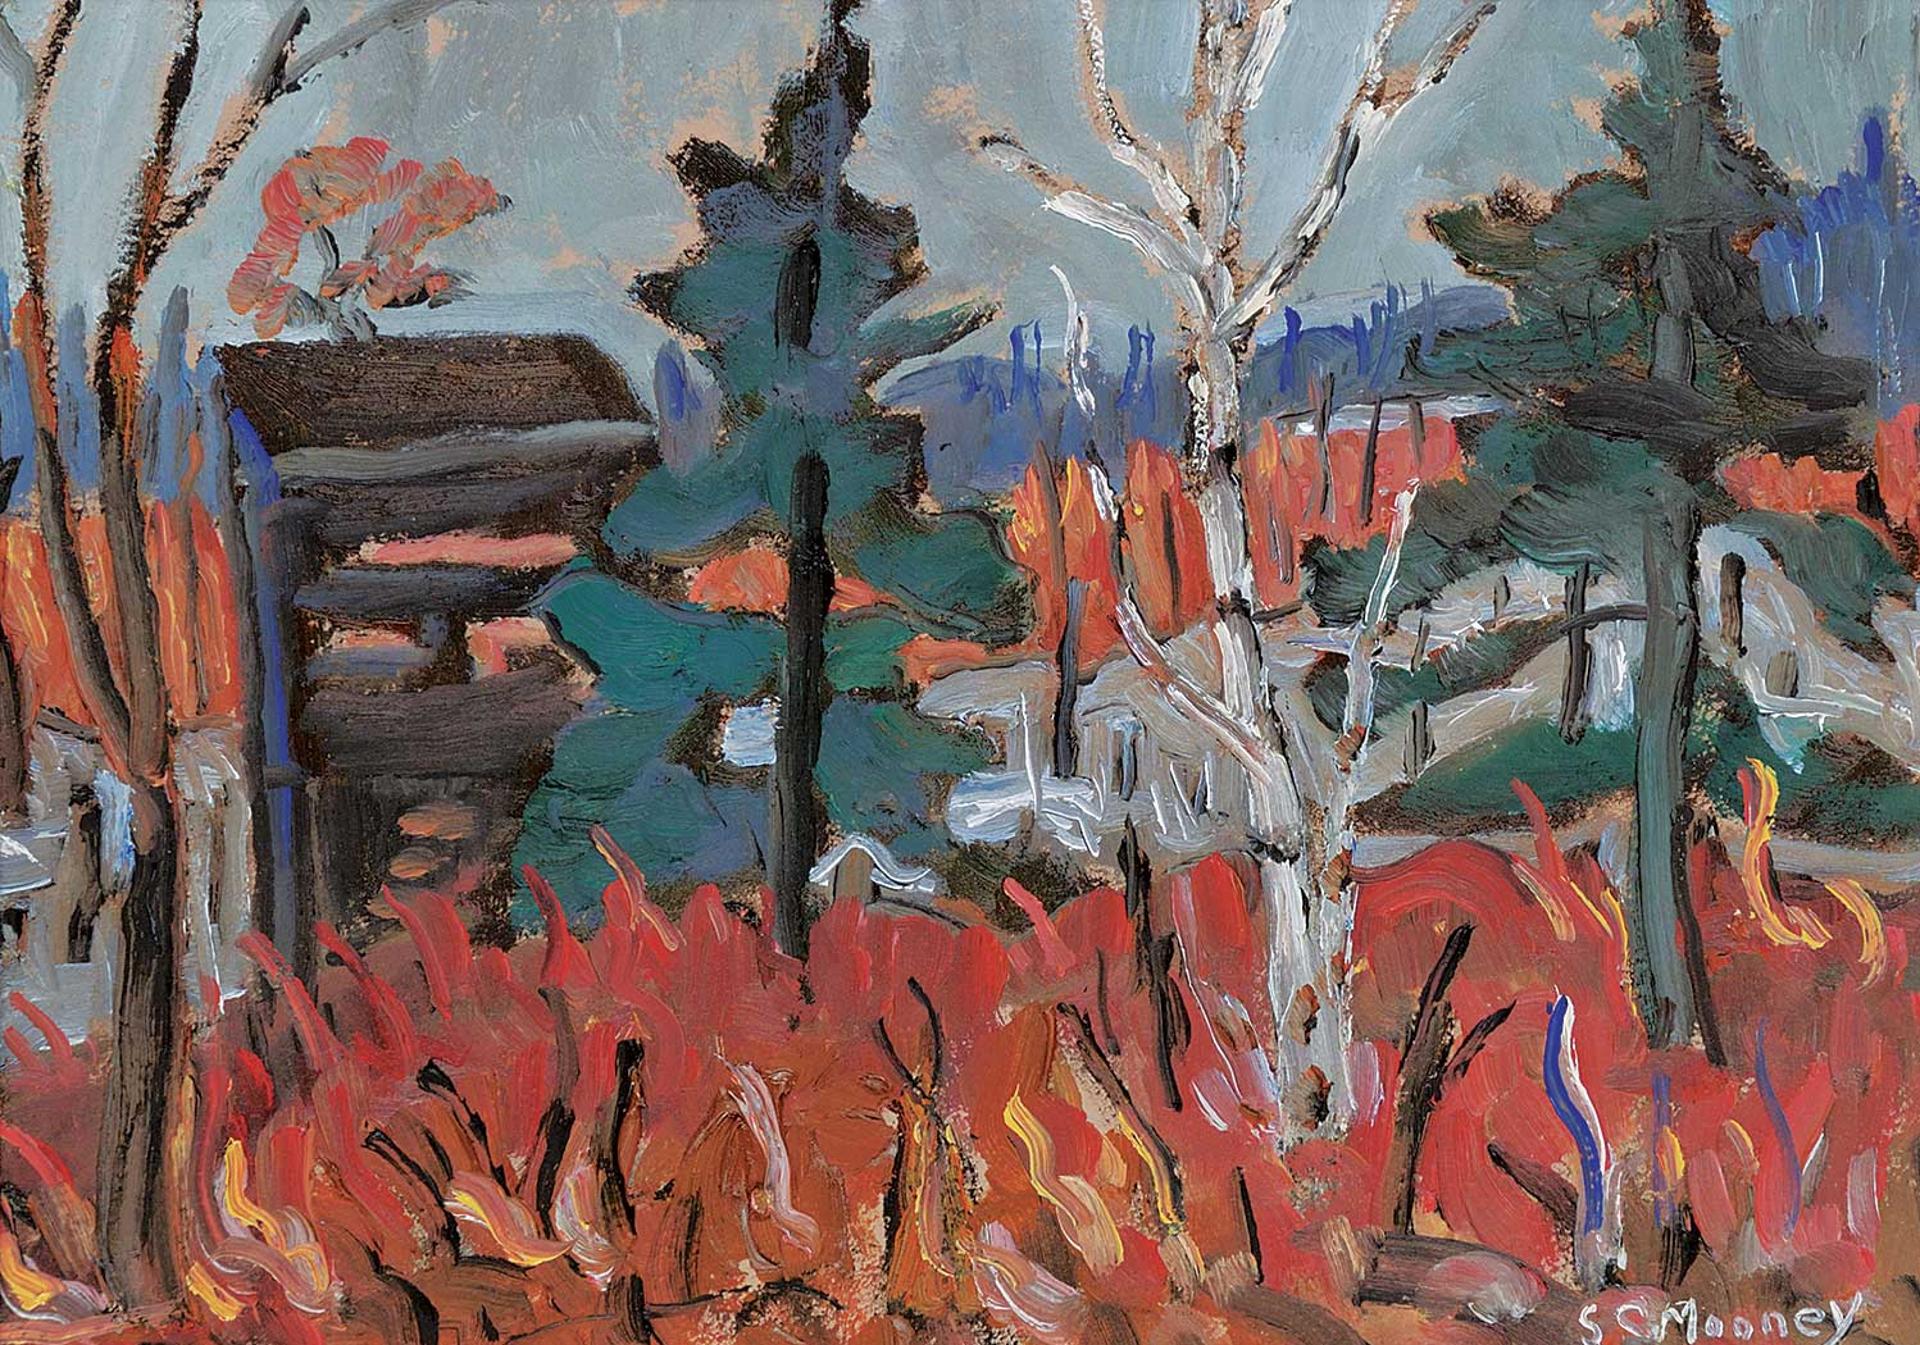 Sidney Charles Mooney (1927-1992) - Untitled - Through the Trees